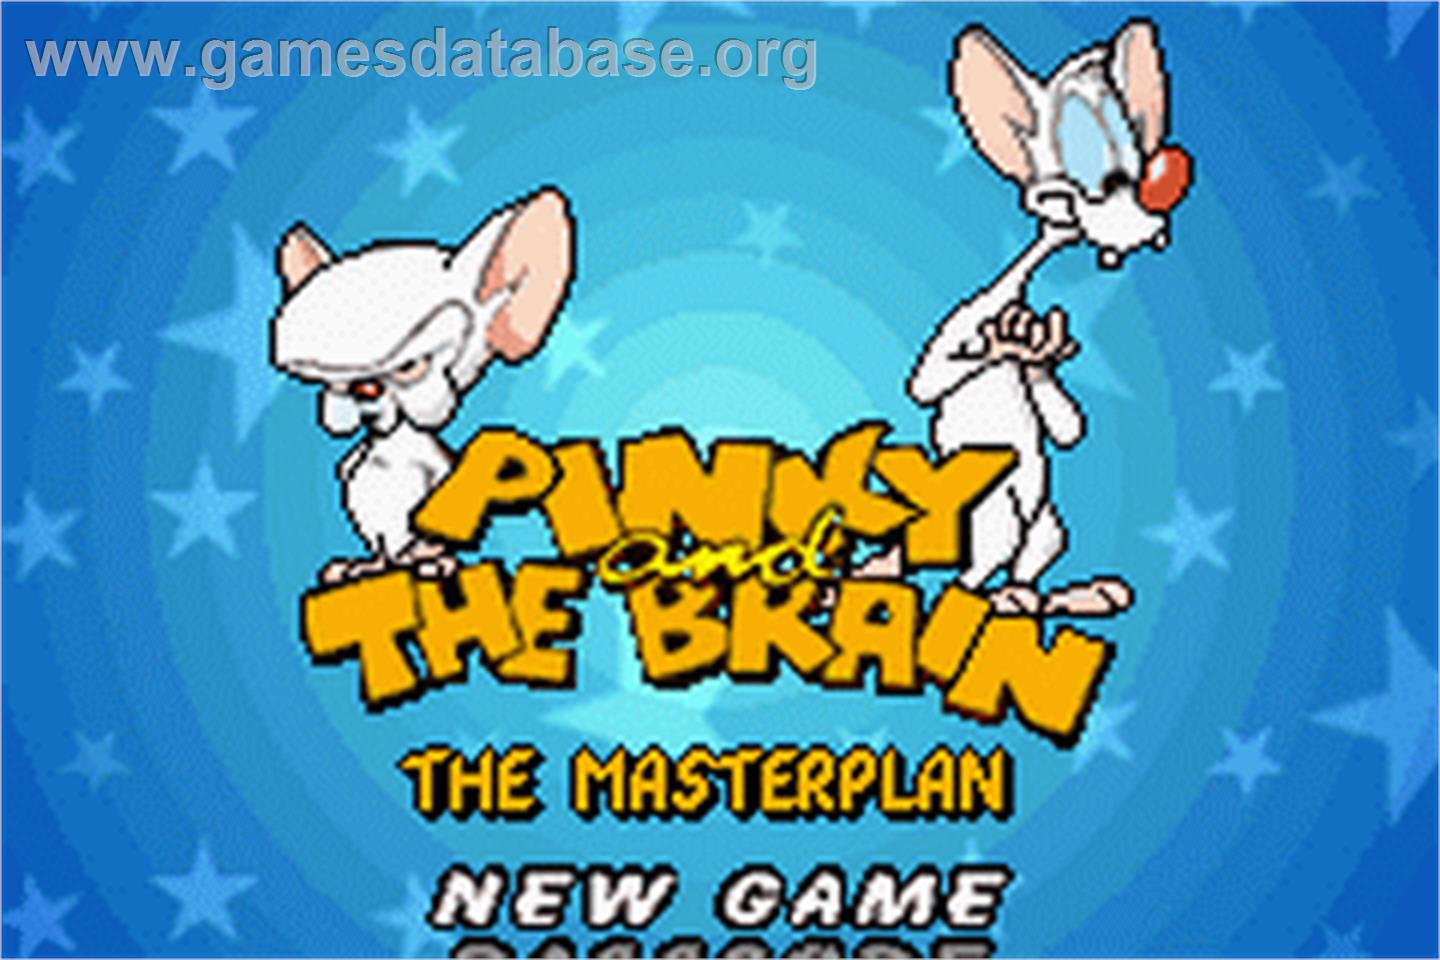 Pinky and the Brain: The Master Plan - Nintendo Game Boy Advance - Artwork - Title Screen